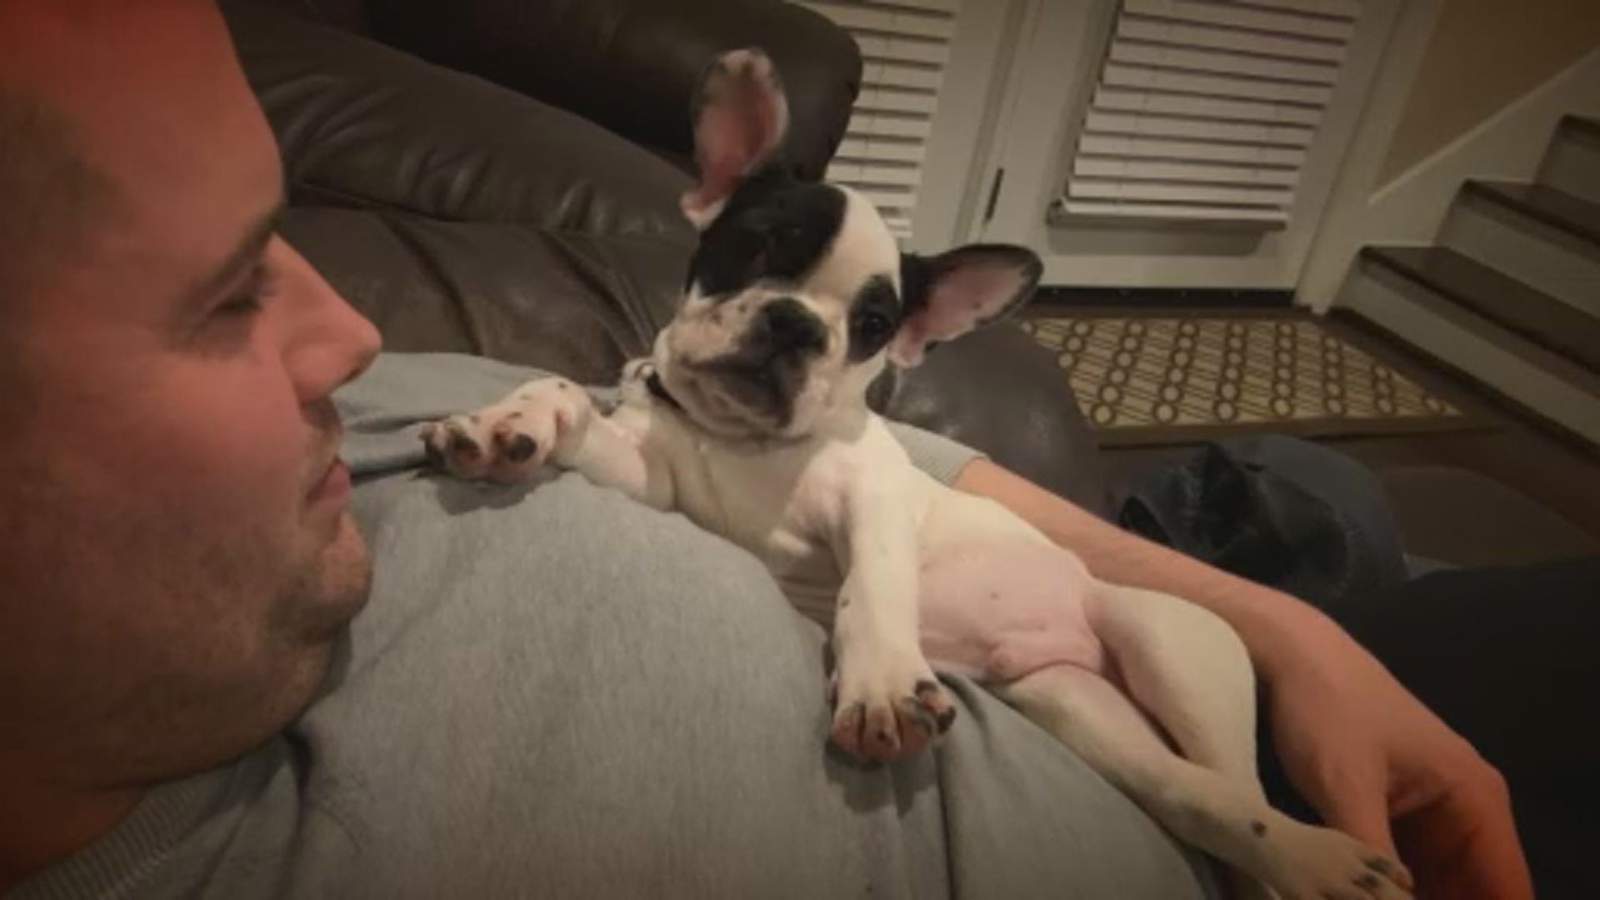 Robbers fire AR-15 at Houston couple before stealing their French bulldog, police say